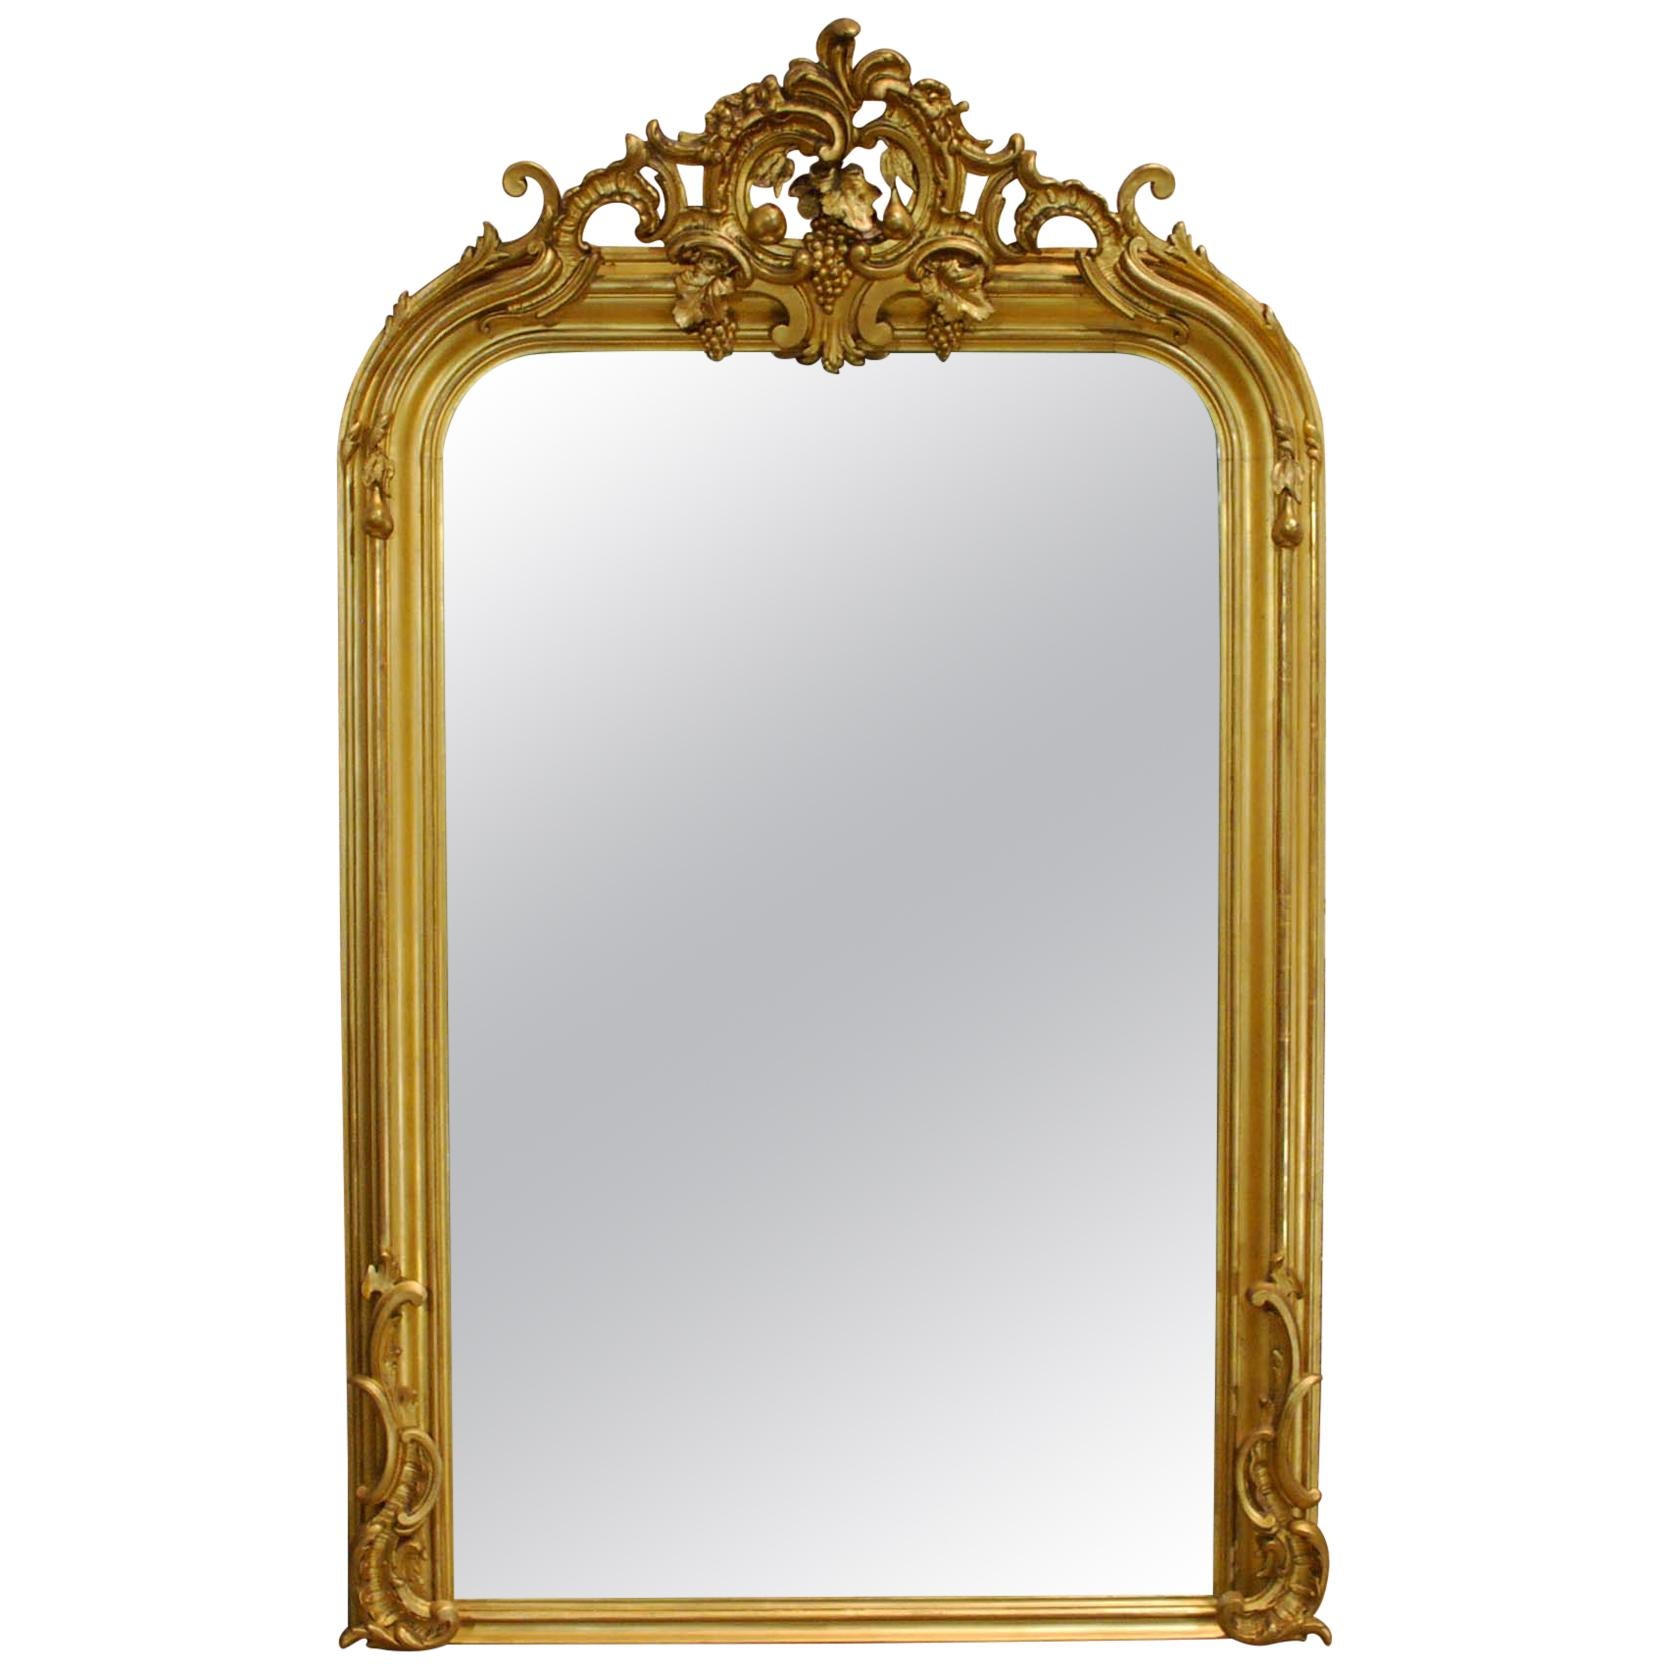 Large Antique French Gold Gilt Louis Philippe Mirror with Ornate Crest